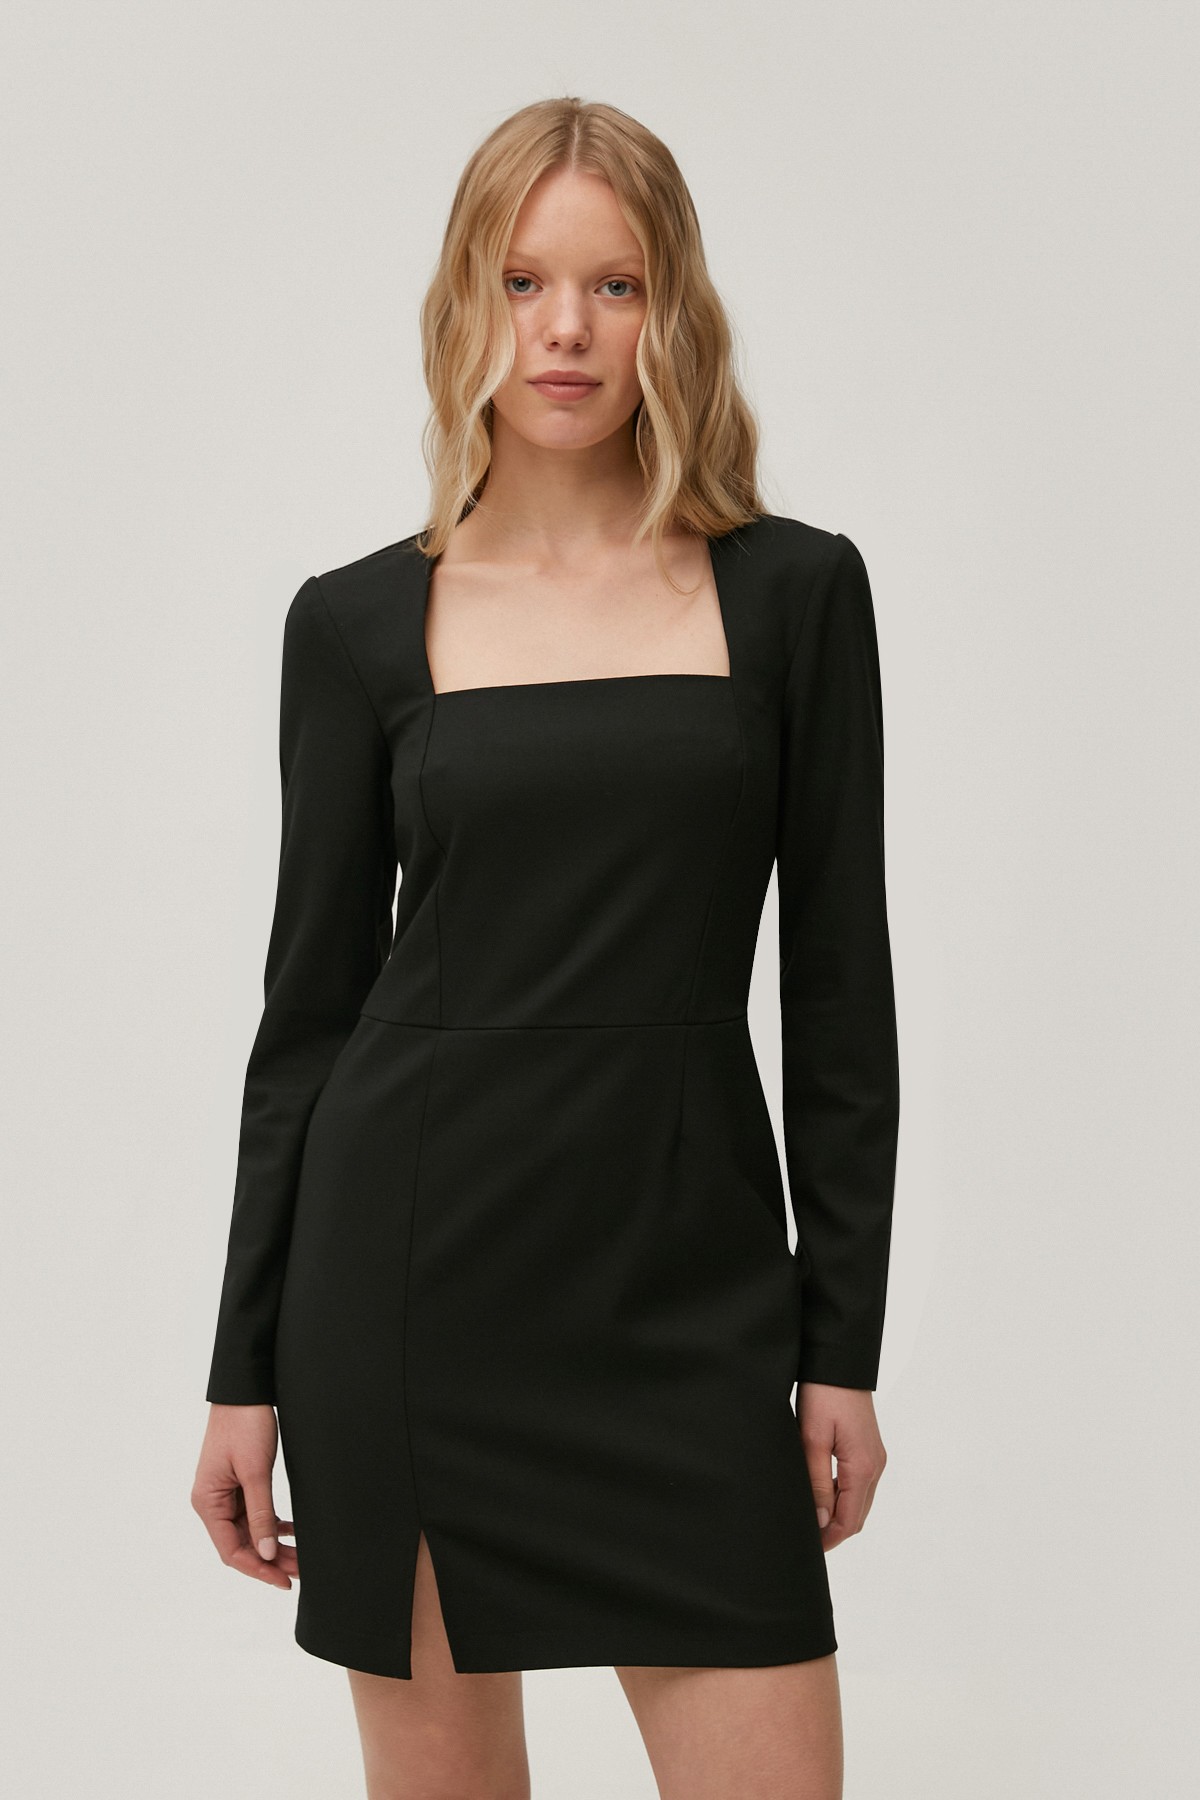 Black mini dress made of suiting fabric with wool